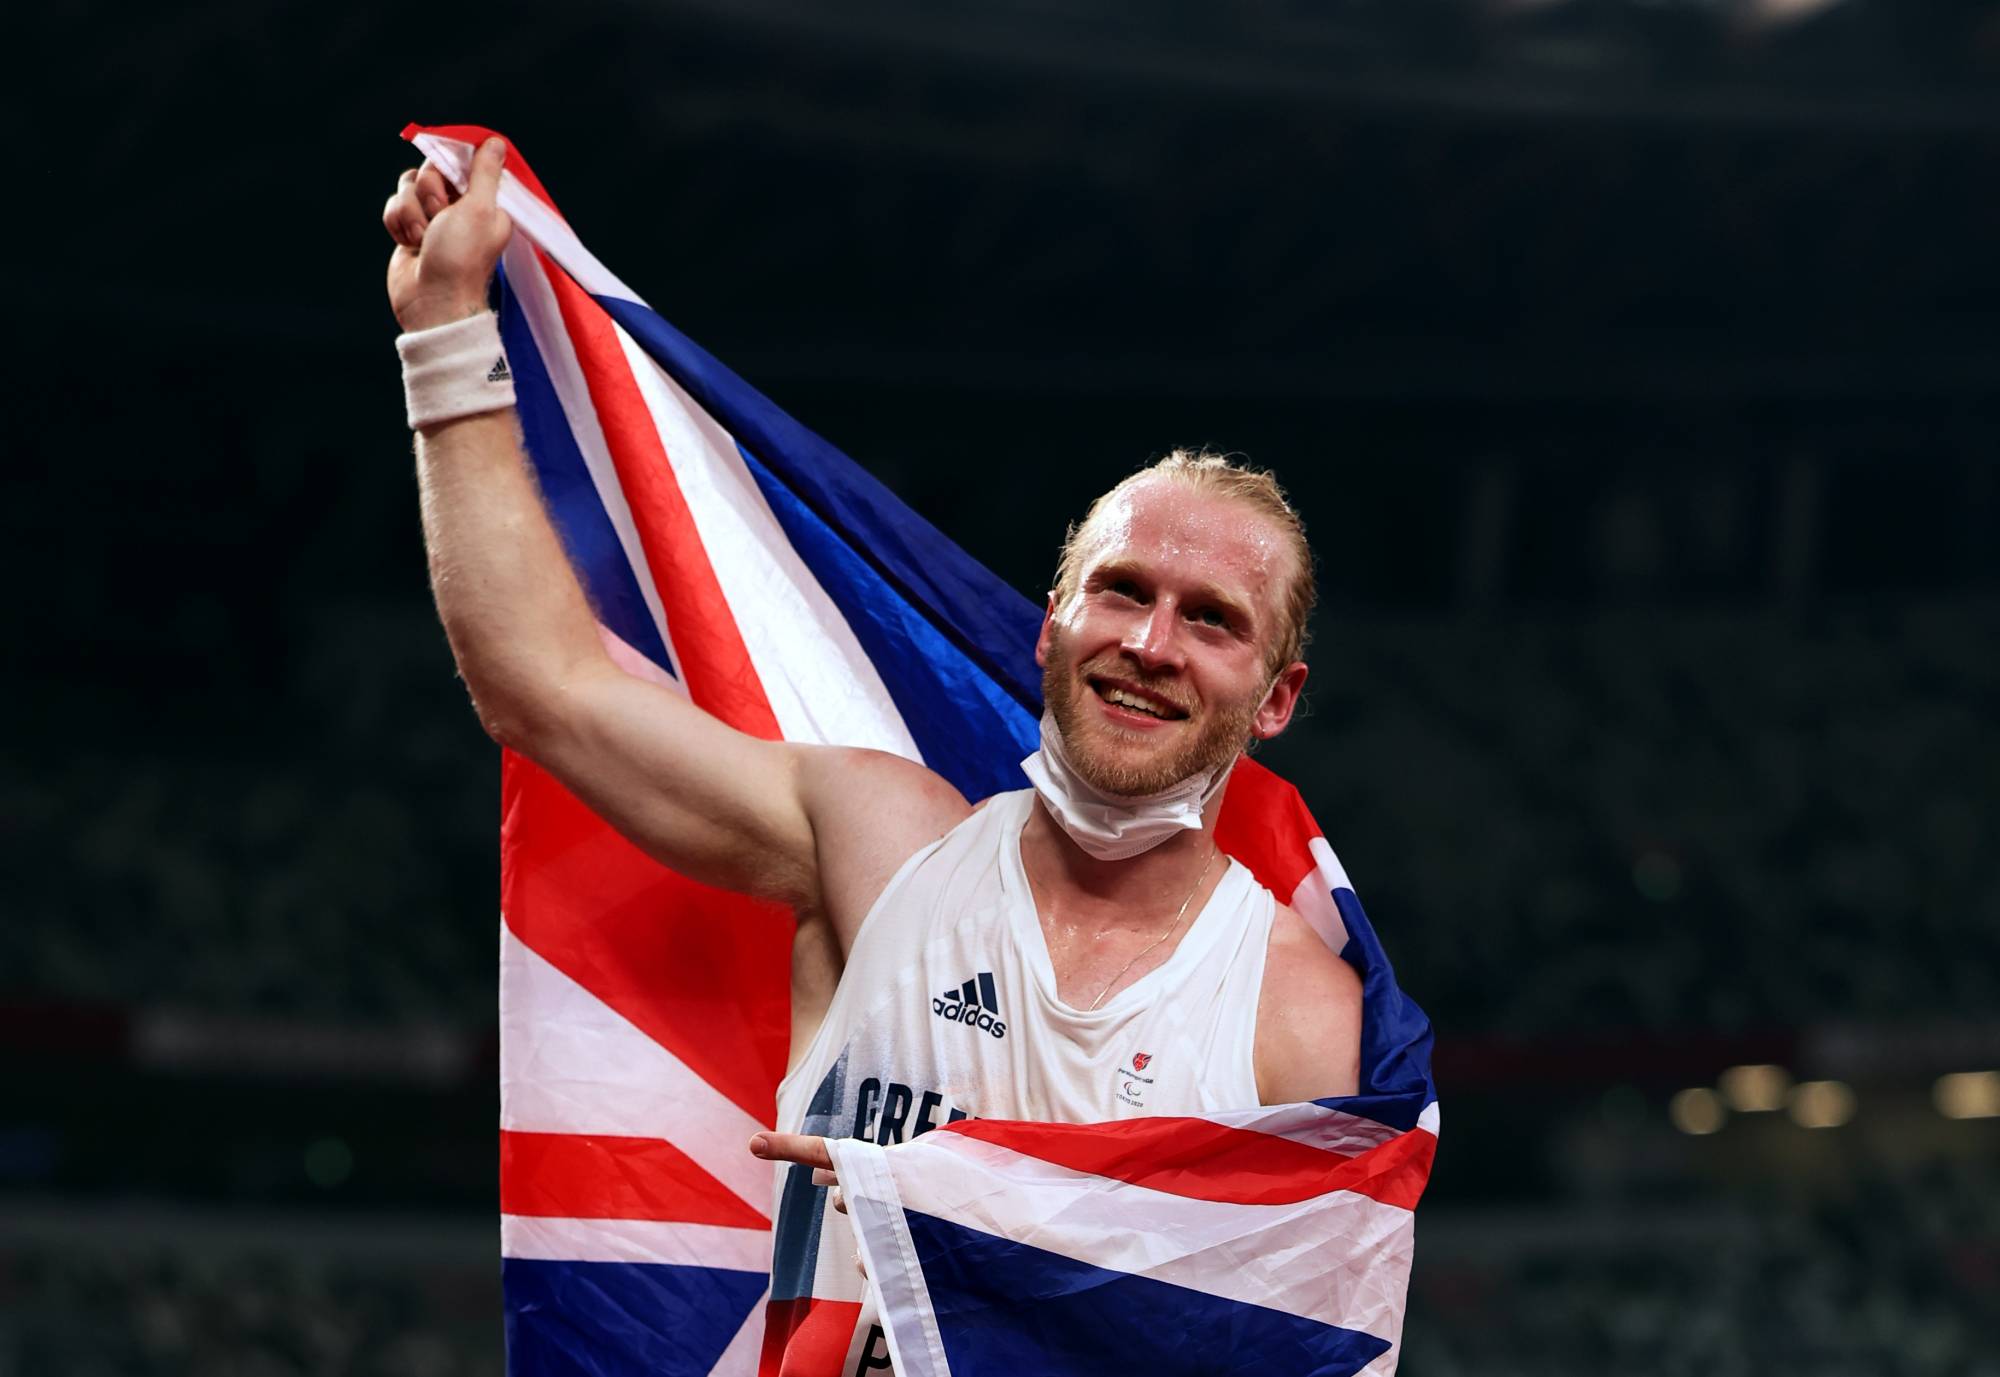 British Sprinter Jonnie Peacock Proud To Be Part Of Paralympic Track